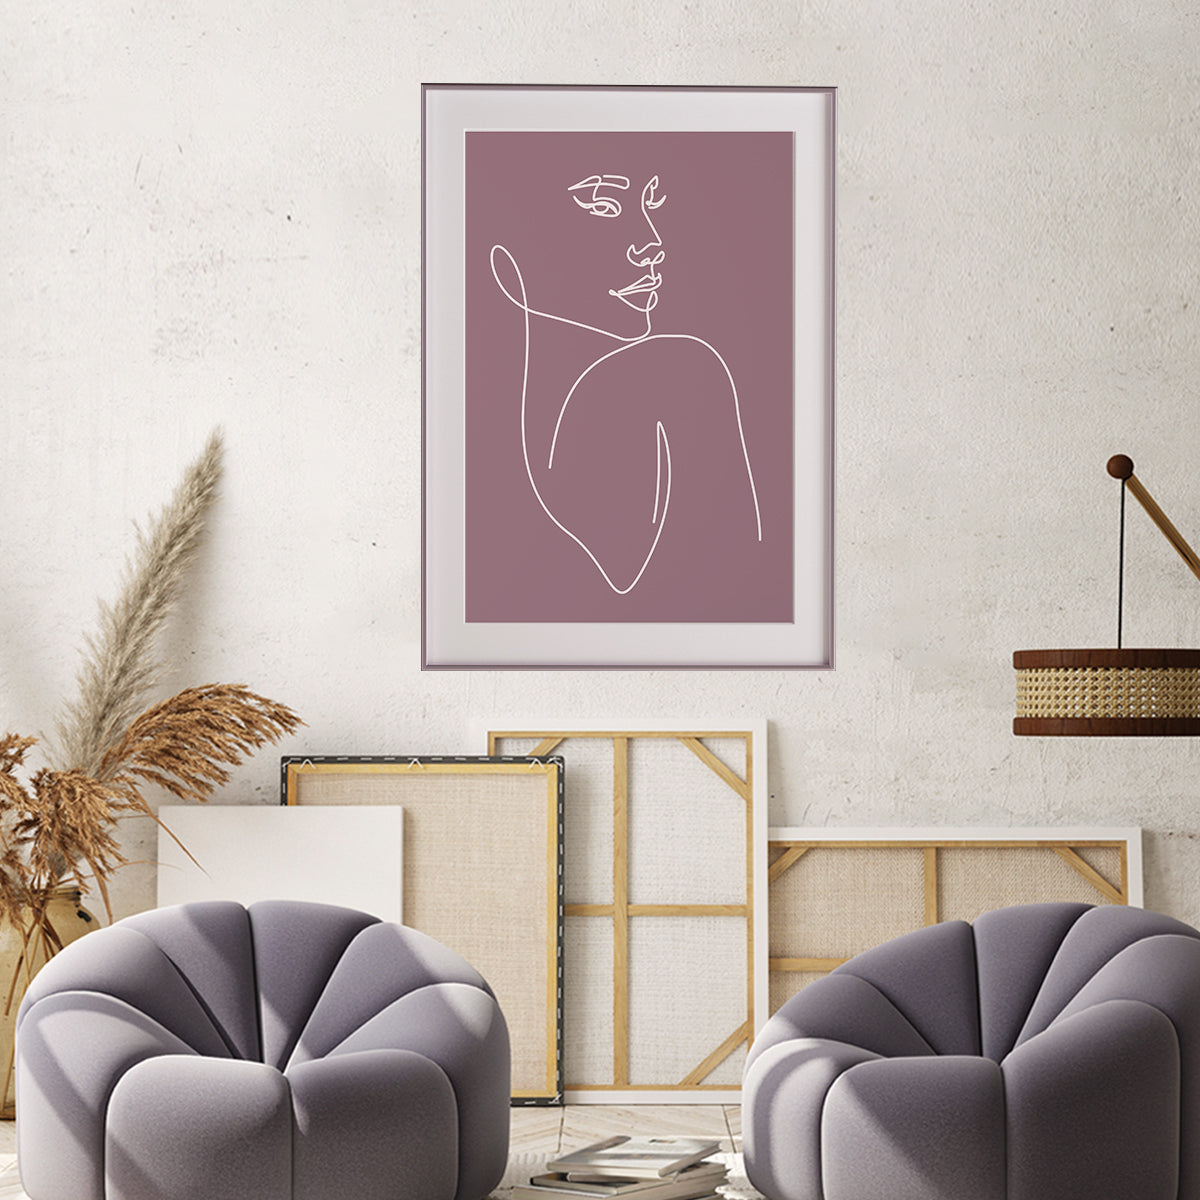 Abstract Line Art Woman Silhouette Living Rooms Posters Wall Art Prints-Vertical Posters NOT FRAMED-CetArt-8″x10″ inches-CetArt